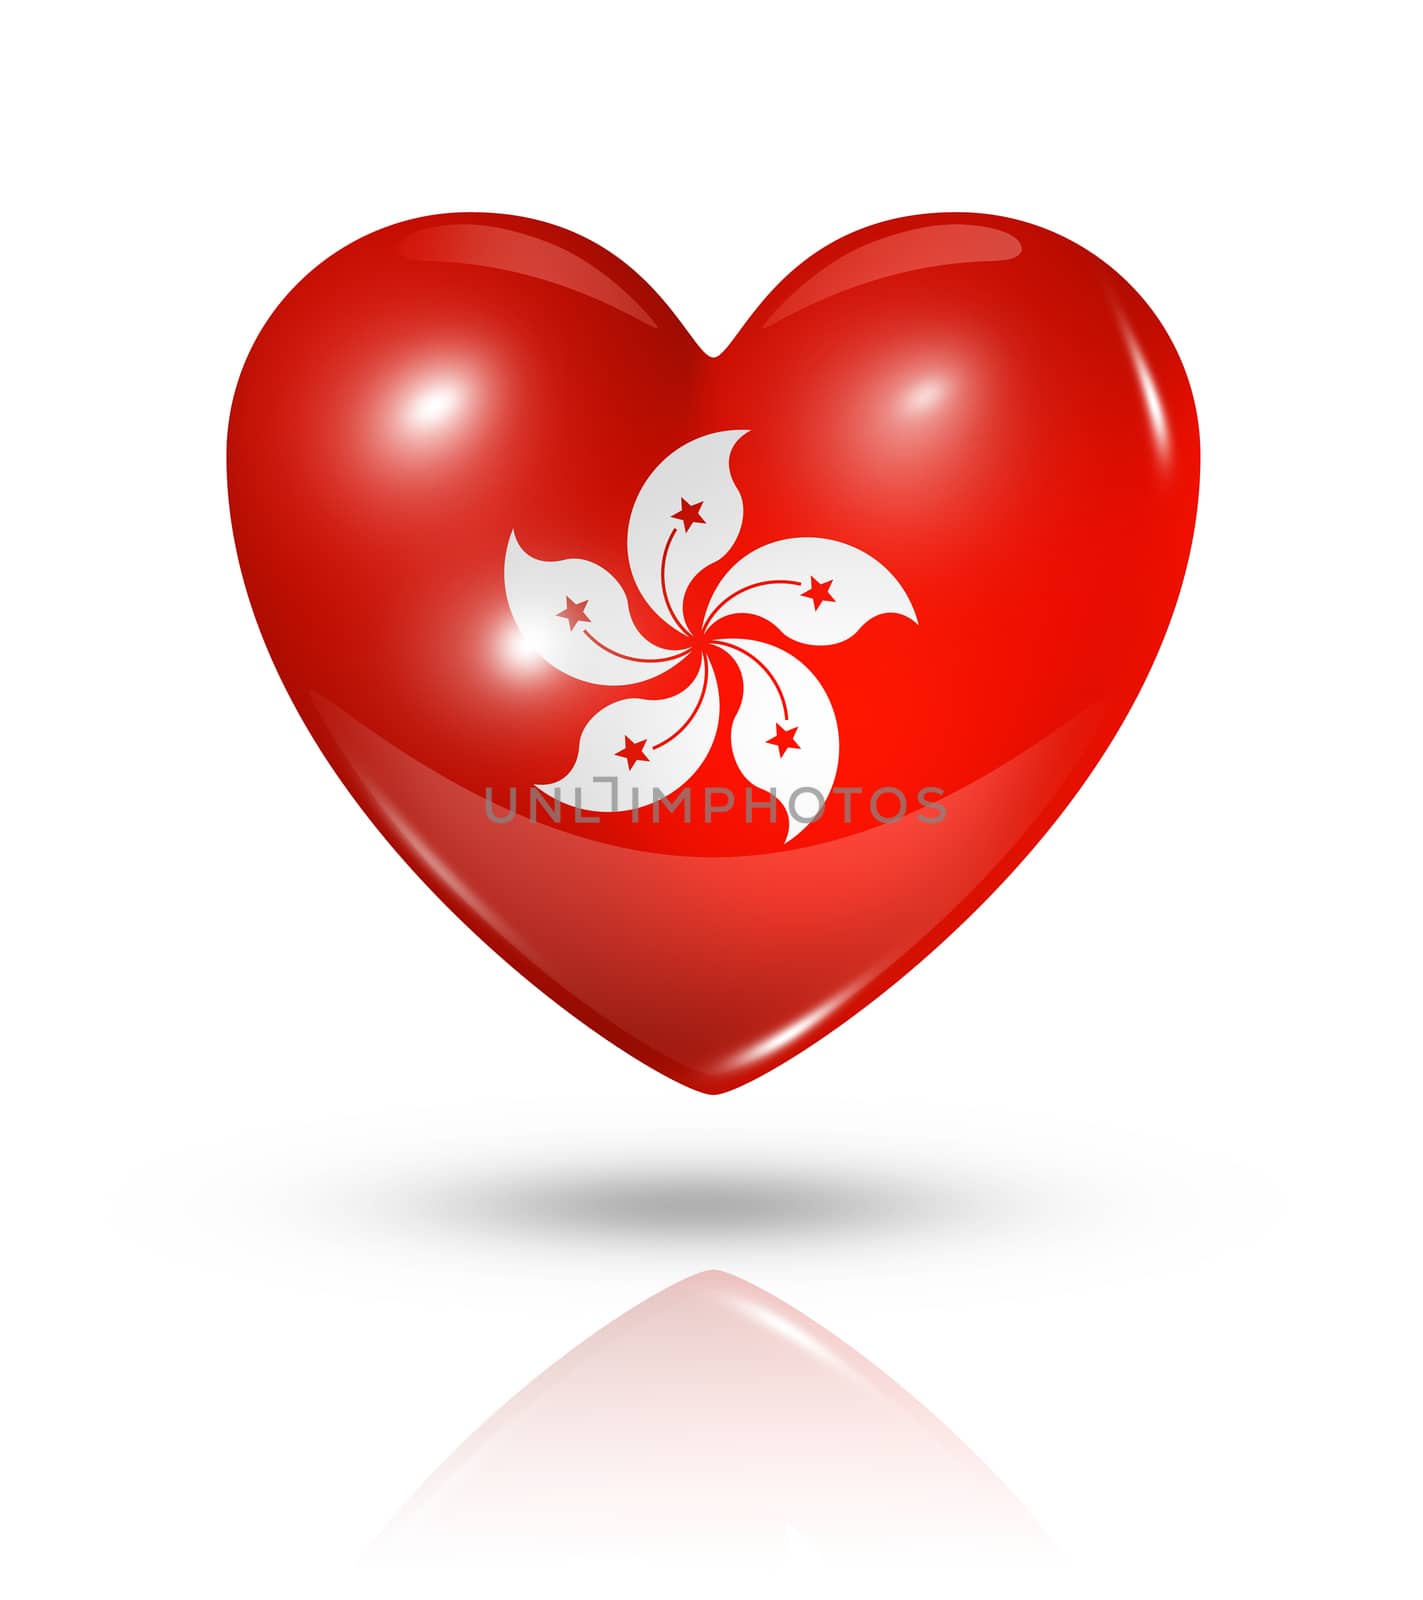 Love Hong Kong, heart flag icon by daboost